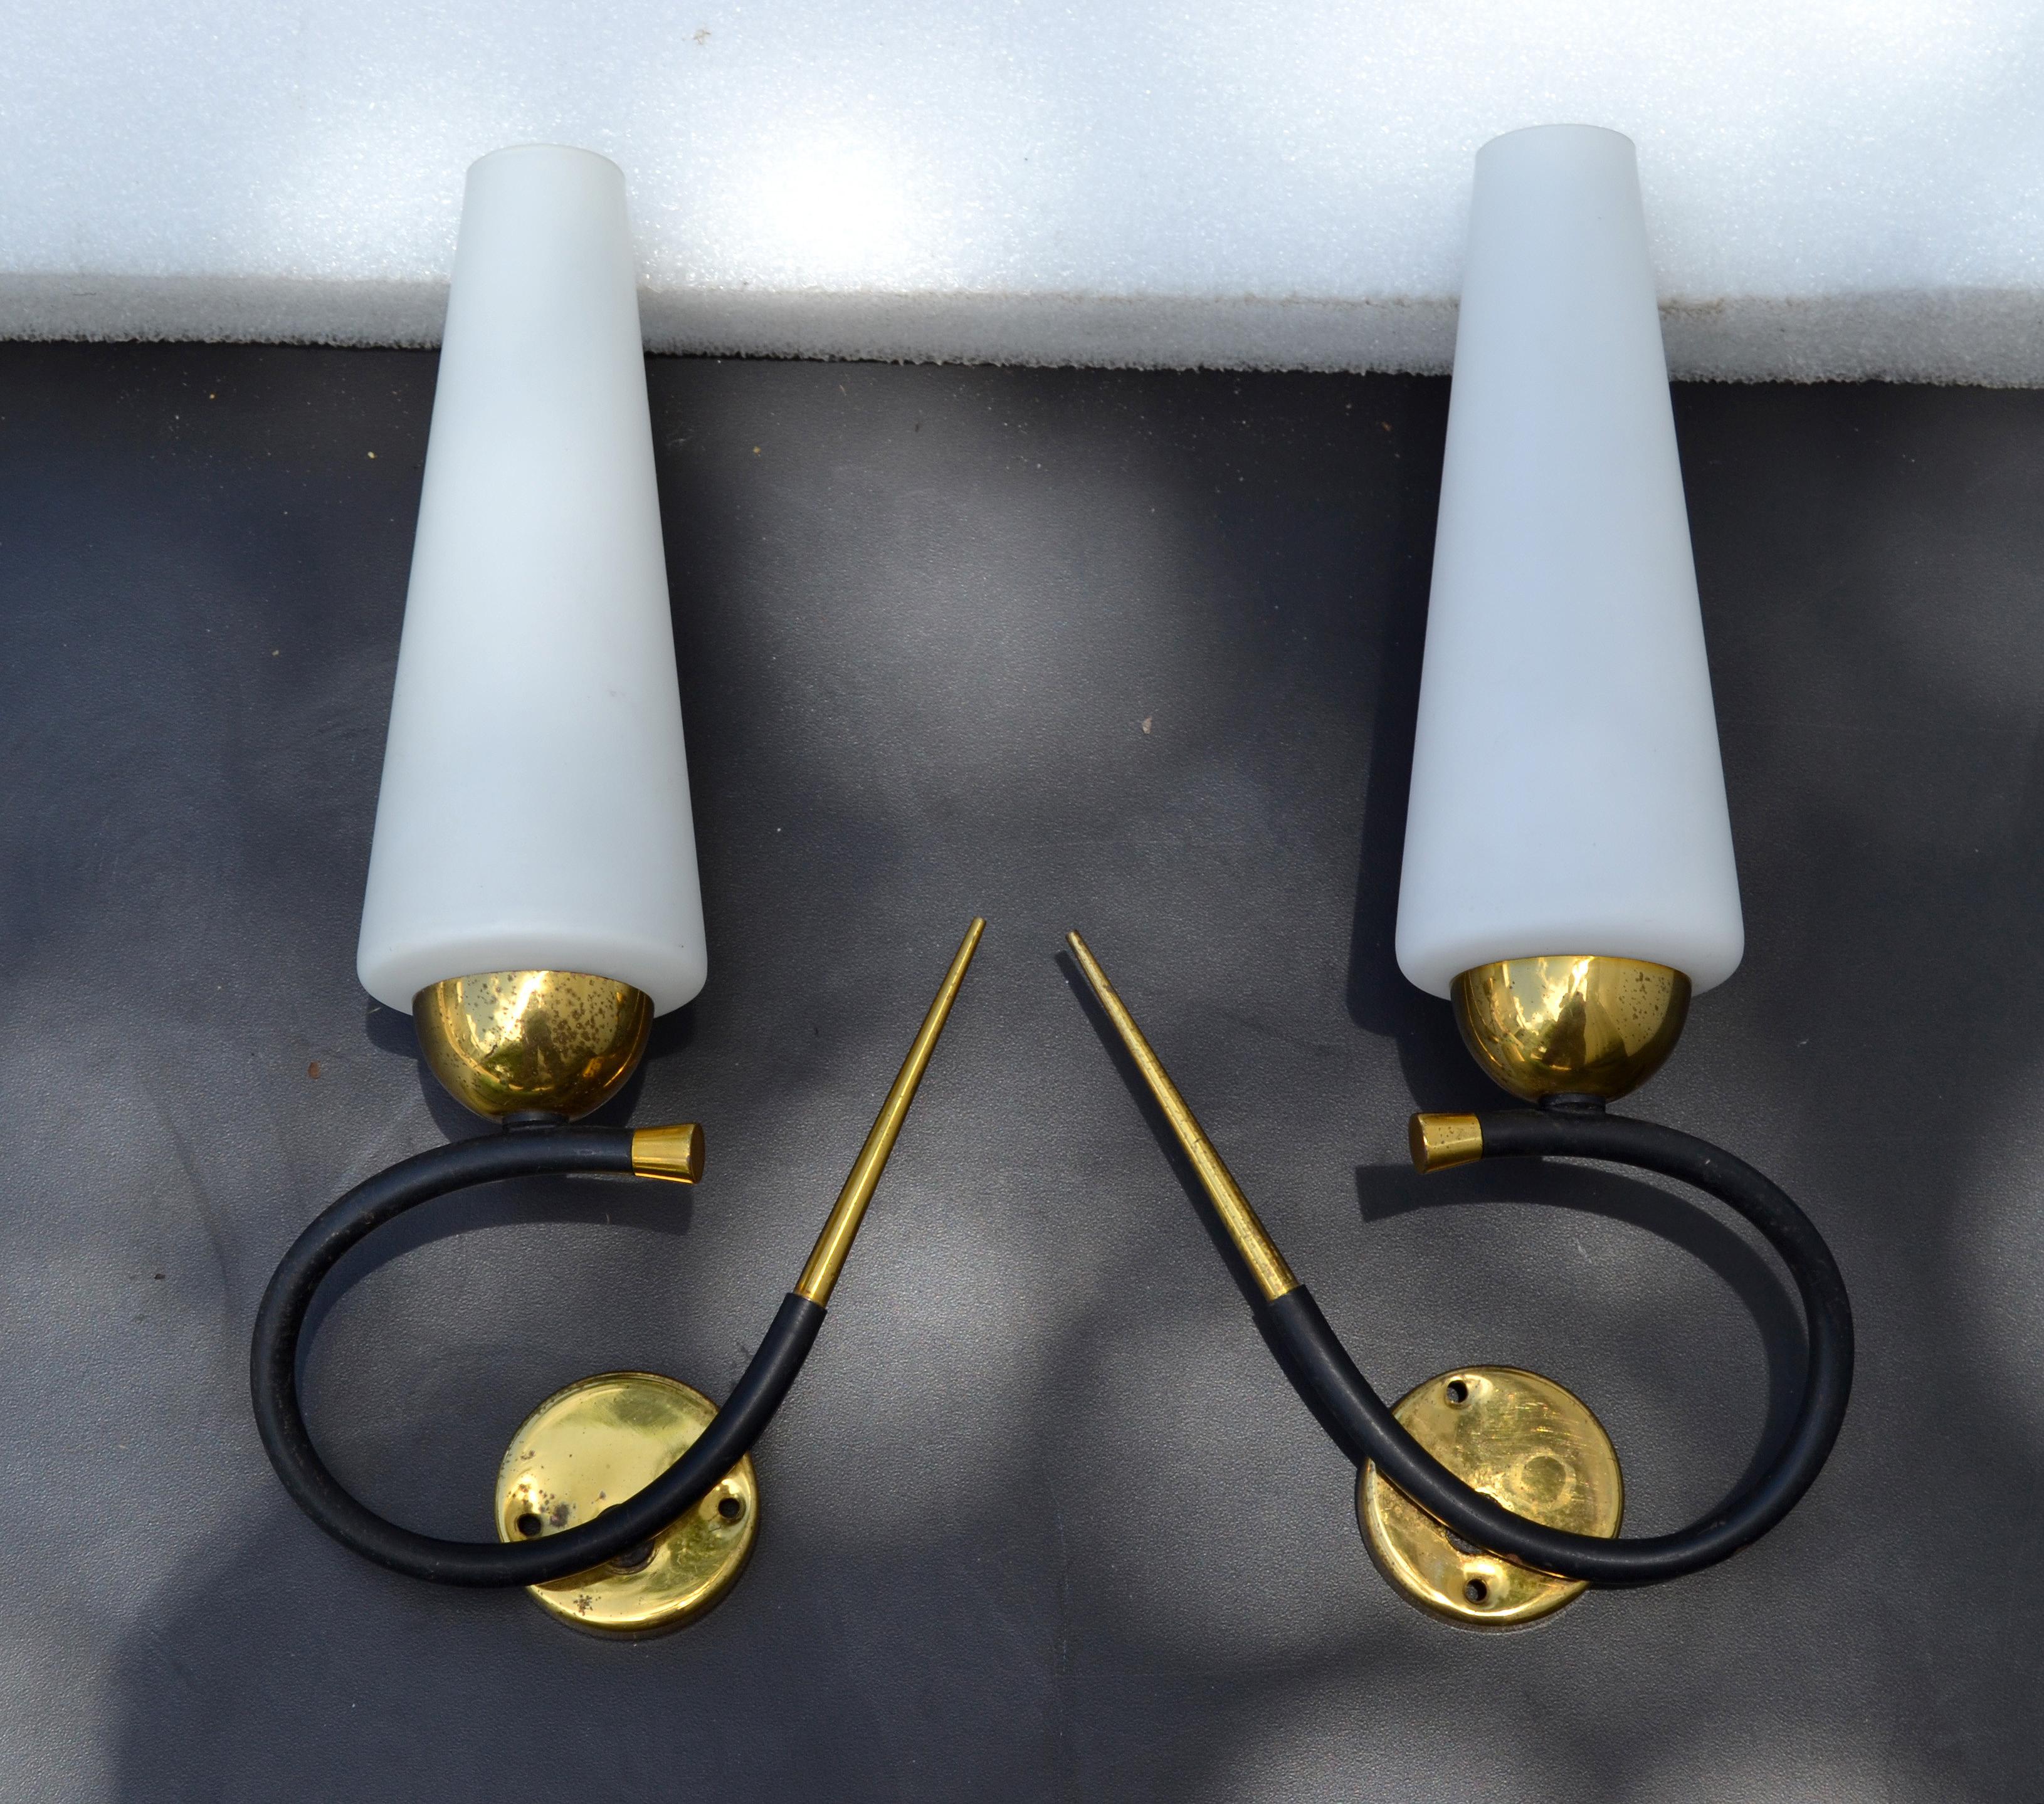 French Maison Lunel Sconce Brass Steel & Opaline Shade France Mid-Century Modern, Pair For Sale